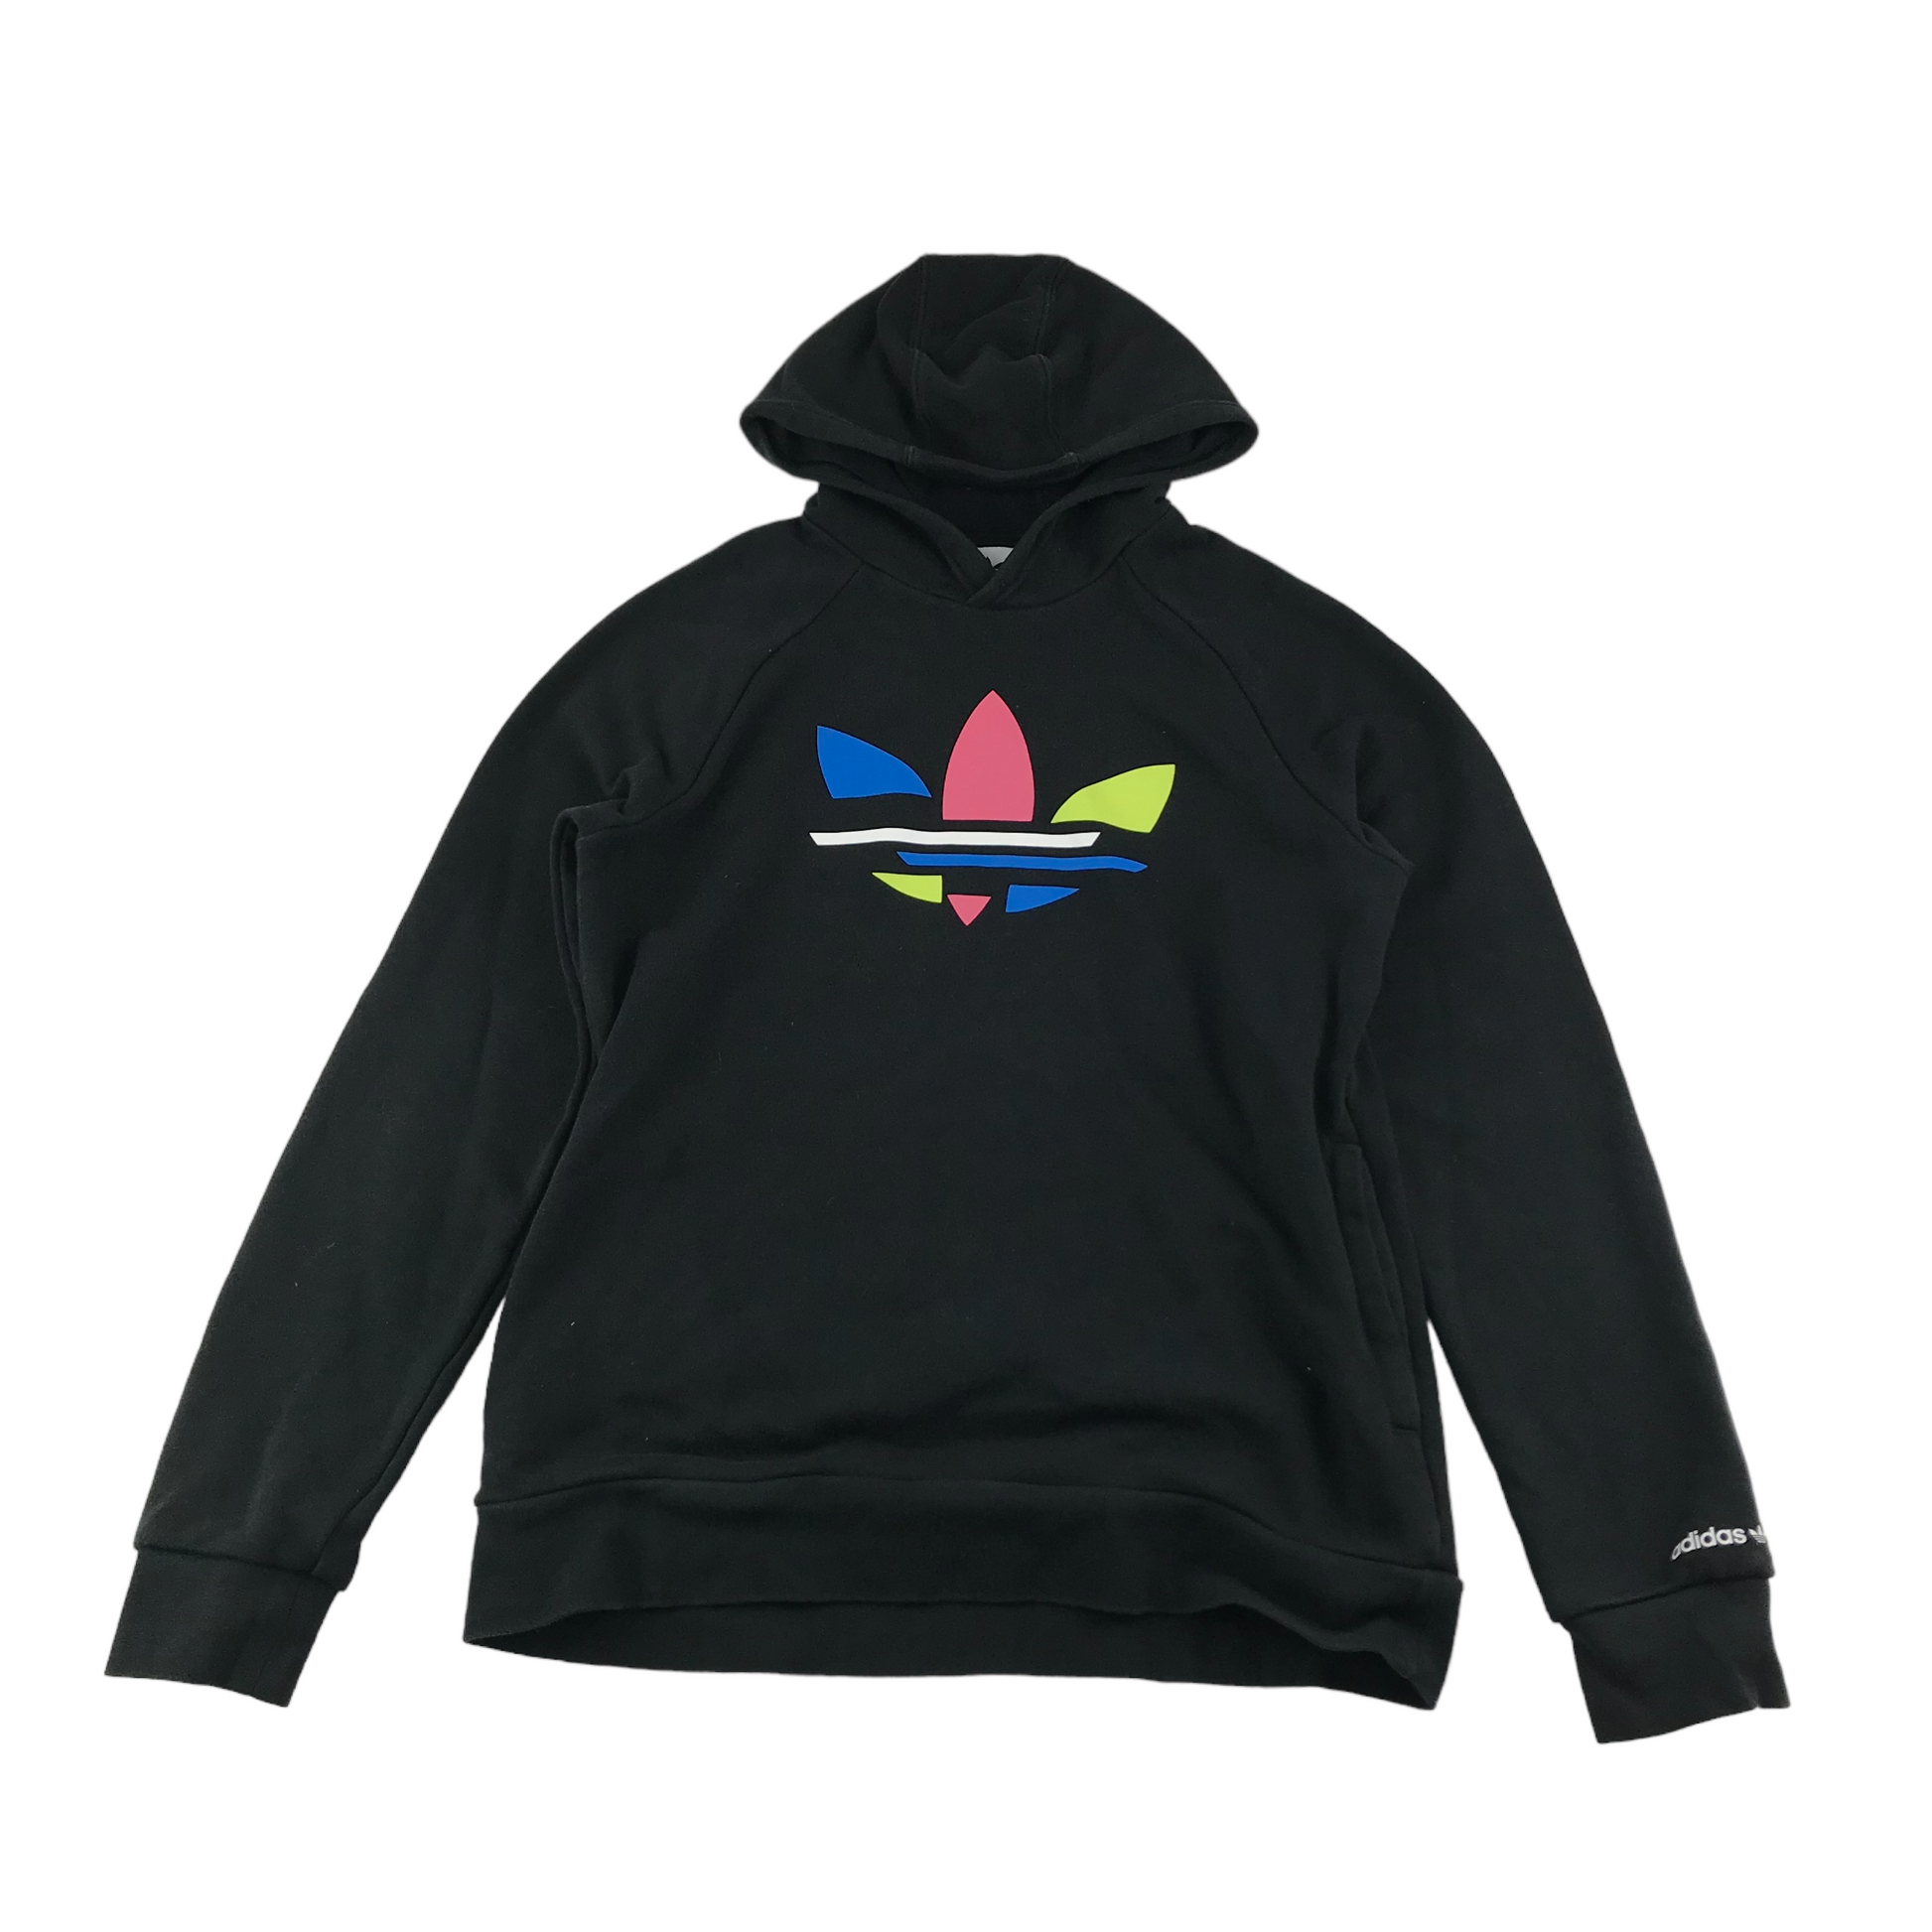 Adidas Hoodie Age 13 Black Colourful Logo Pullover ...